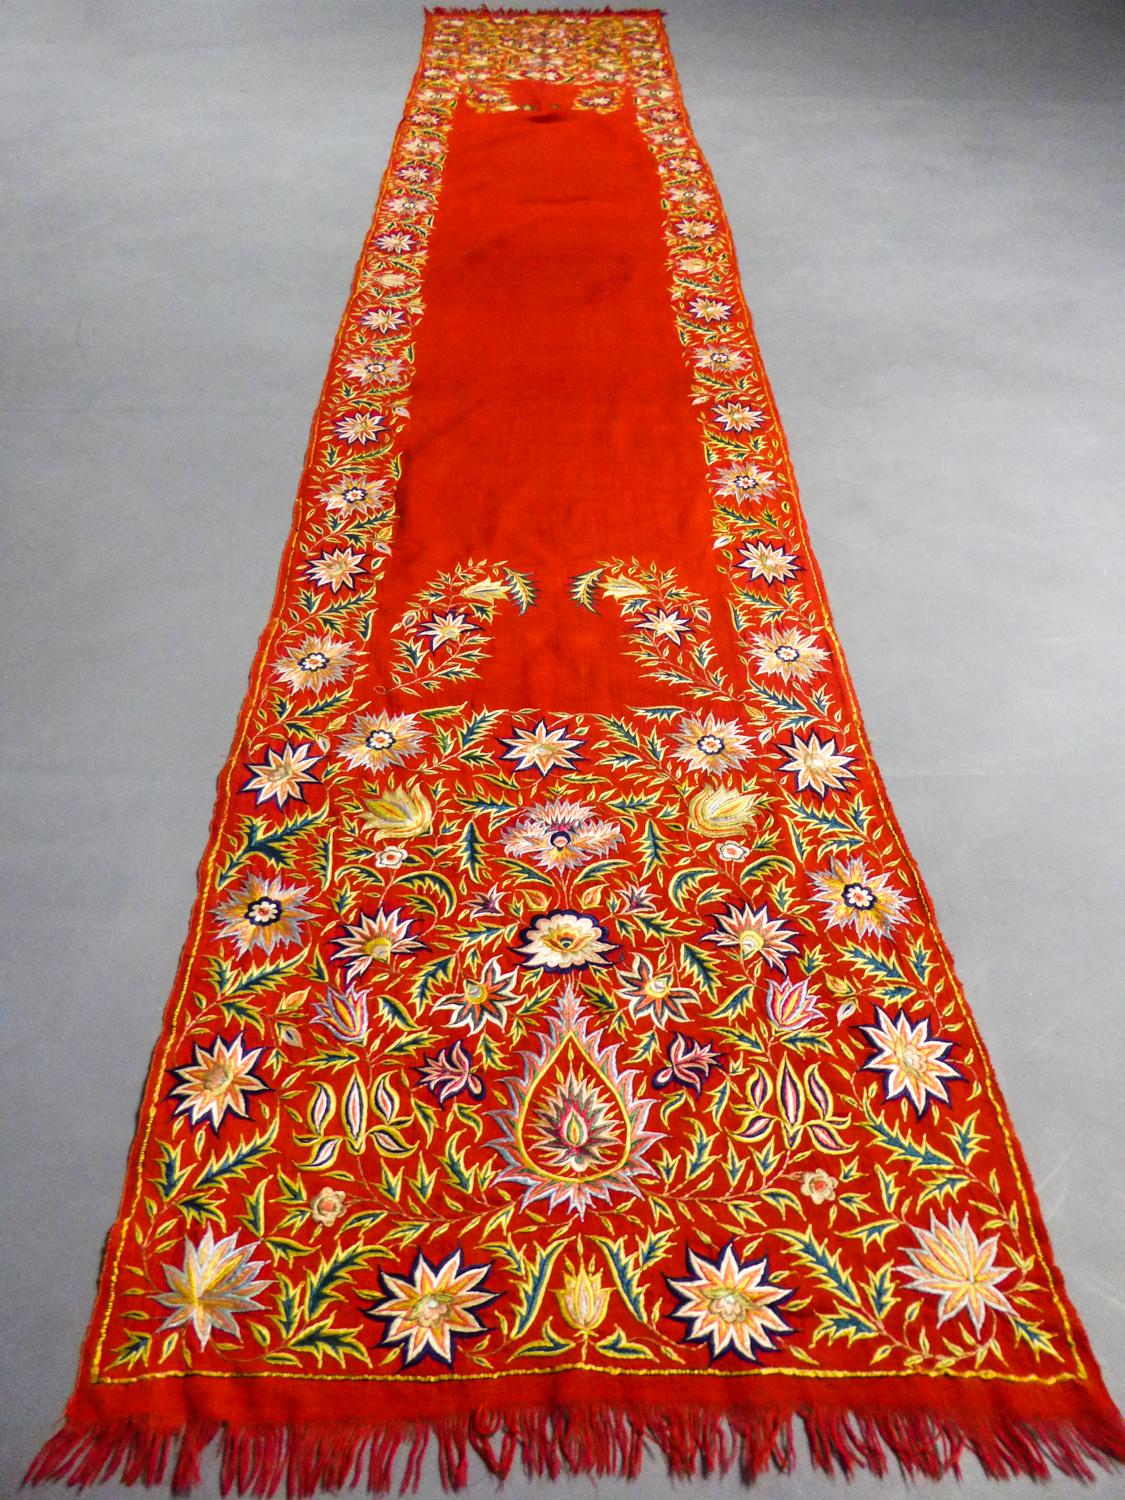 Circa 1830/1850
India for export to Europe

Very fine and soft Dehli stole in pashmina embroidered in India for export to Europe before 1850. Reversible embroidery in straight stitch of floss-silk with strong polychromy on a scarlet red pashmina